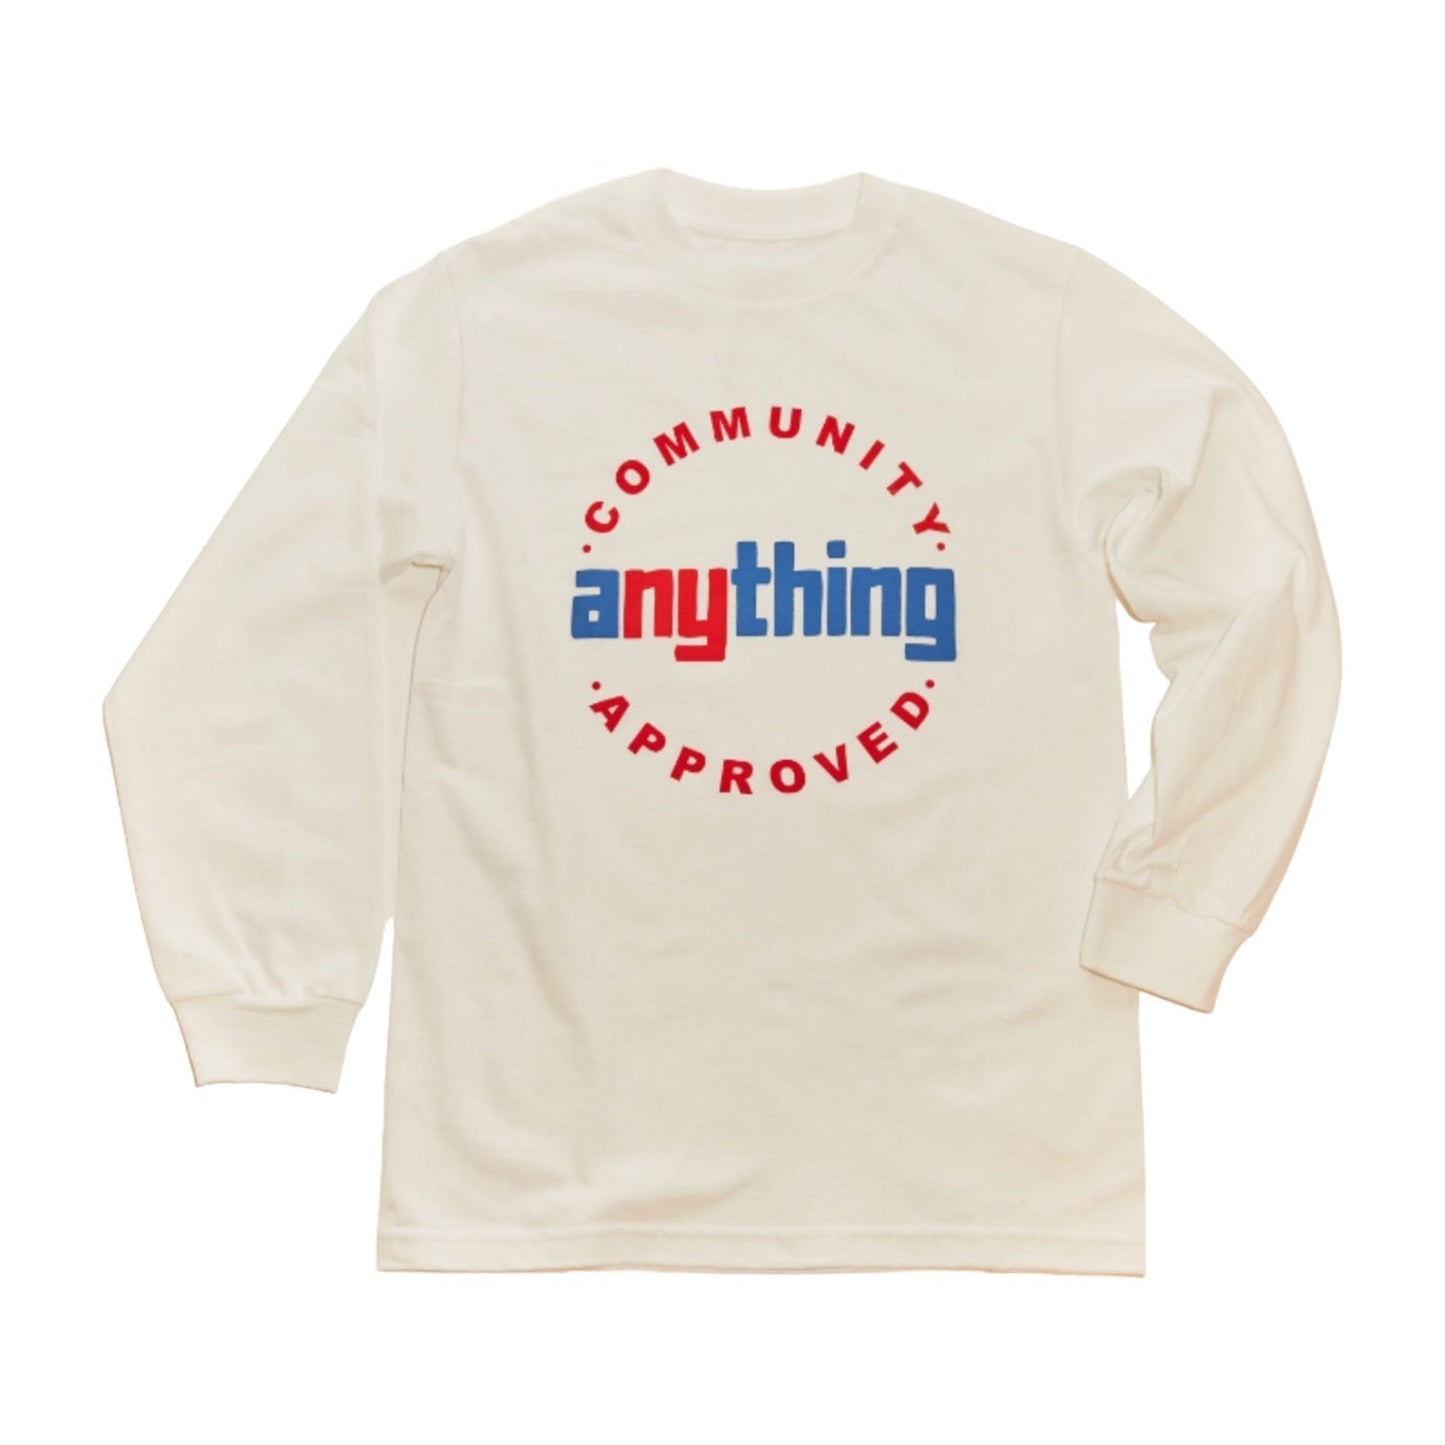 Community Approved L/S Tee | White